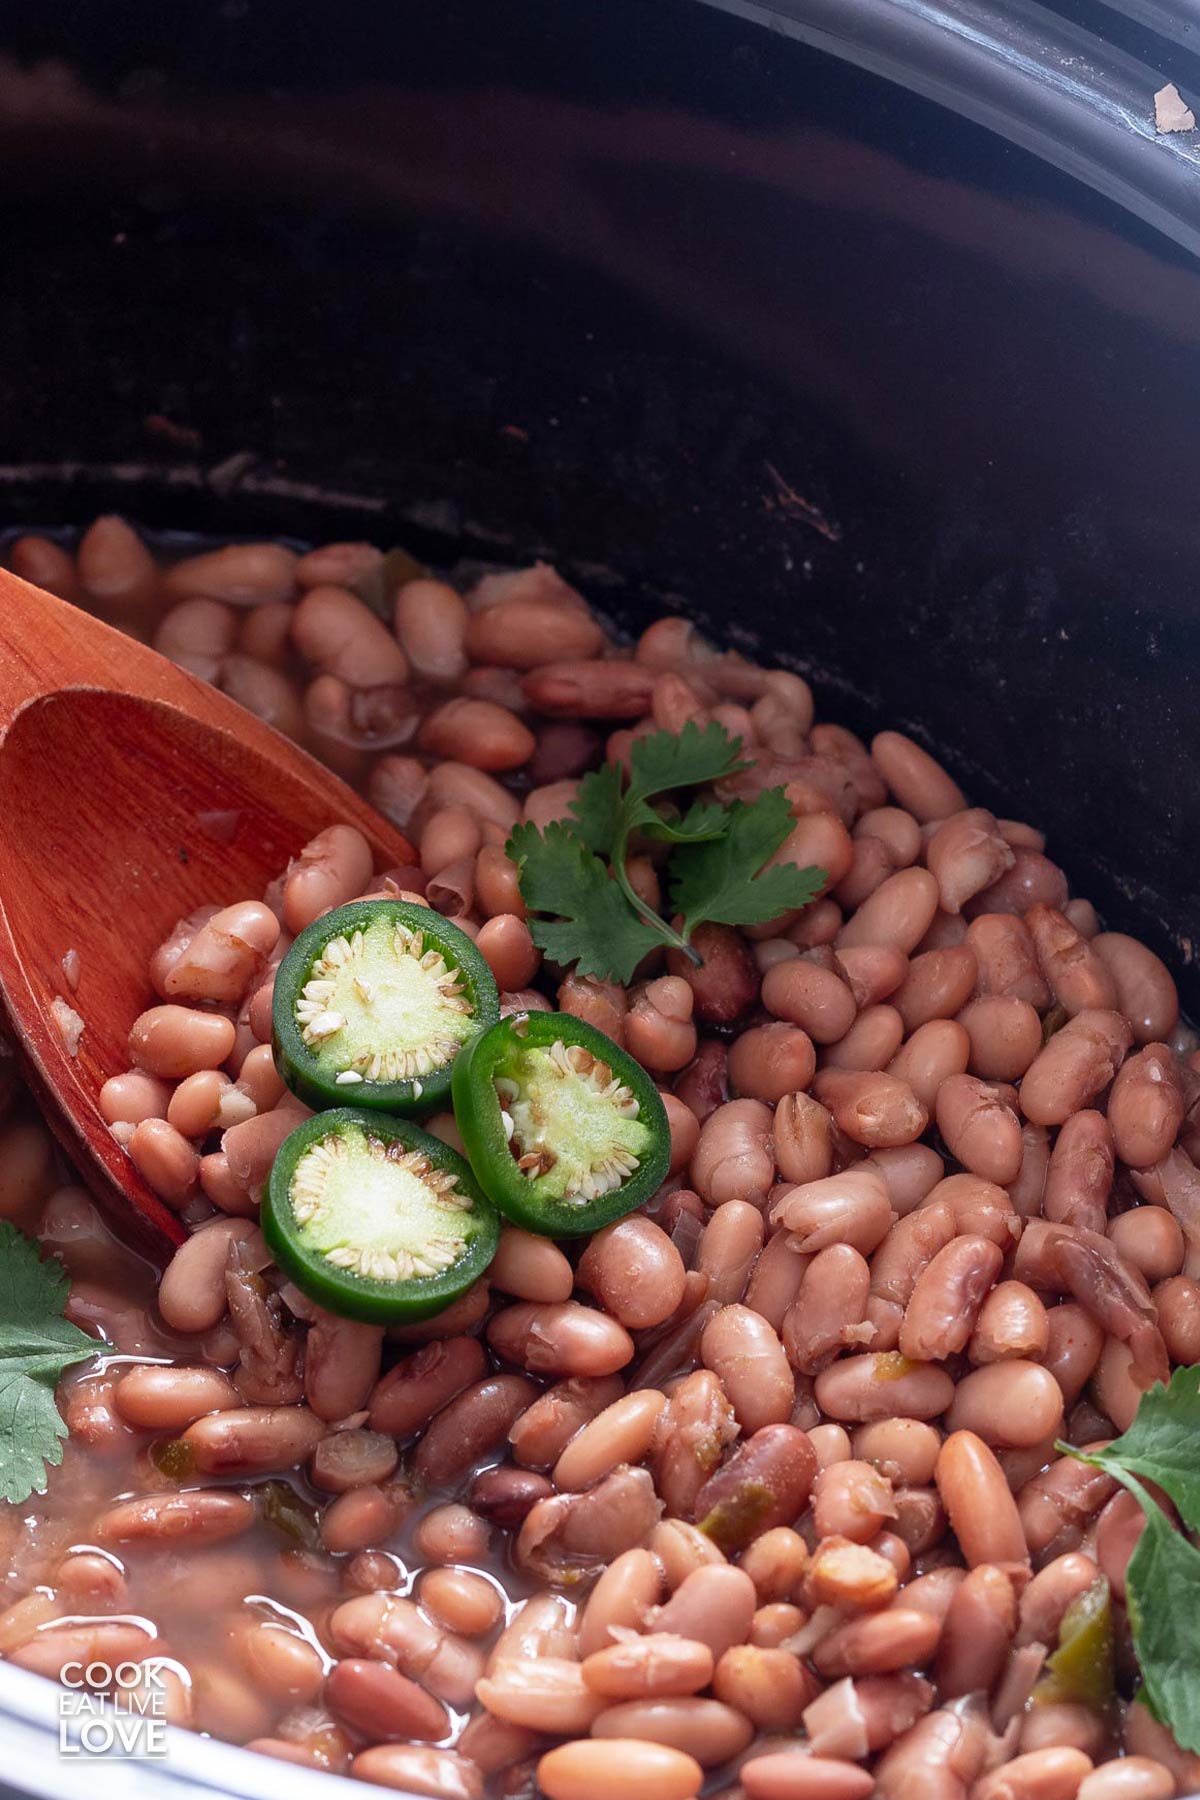 Pinto beans in the crockpot with a wooden spoon and cilantro and jalapeno.